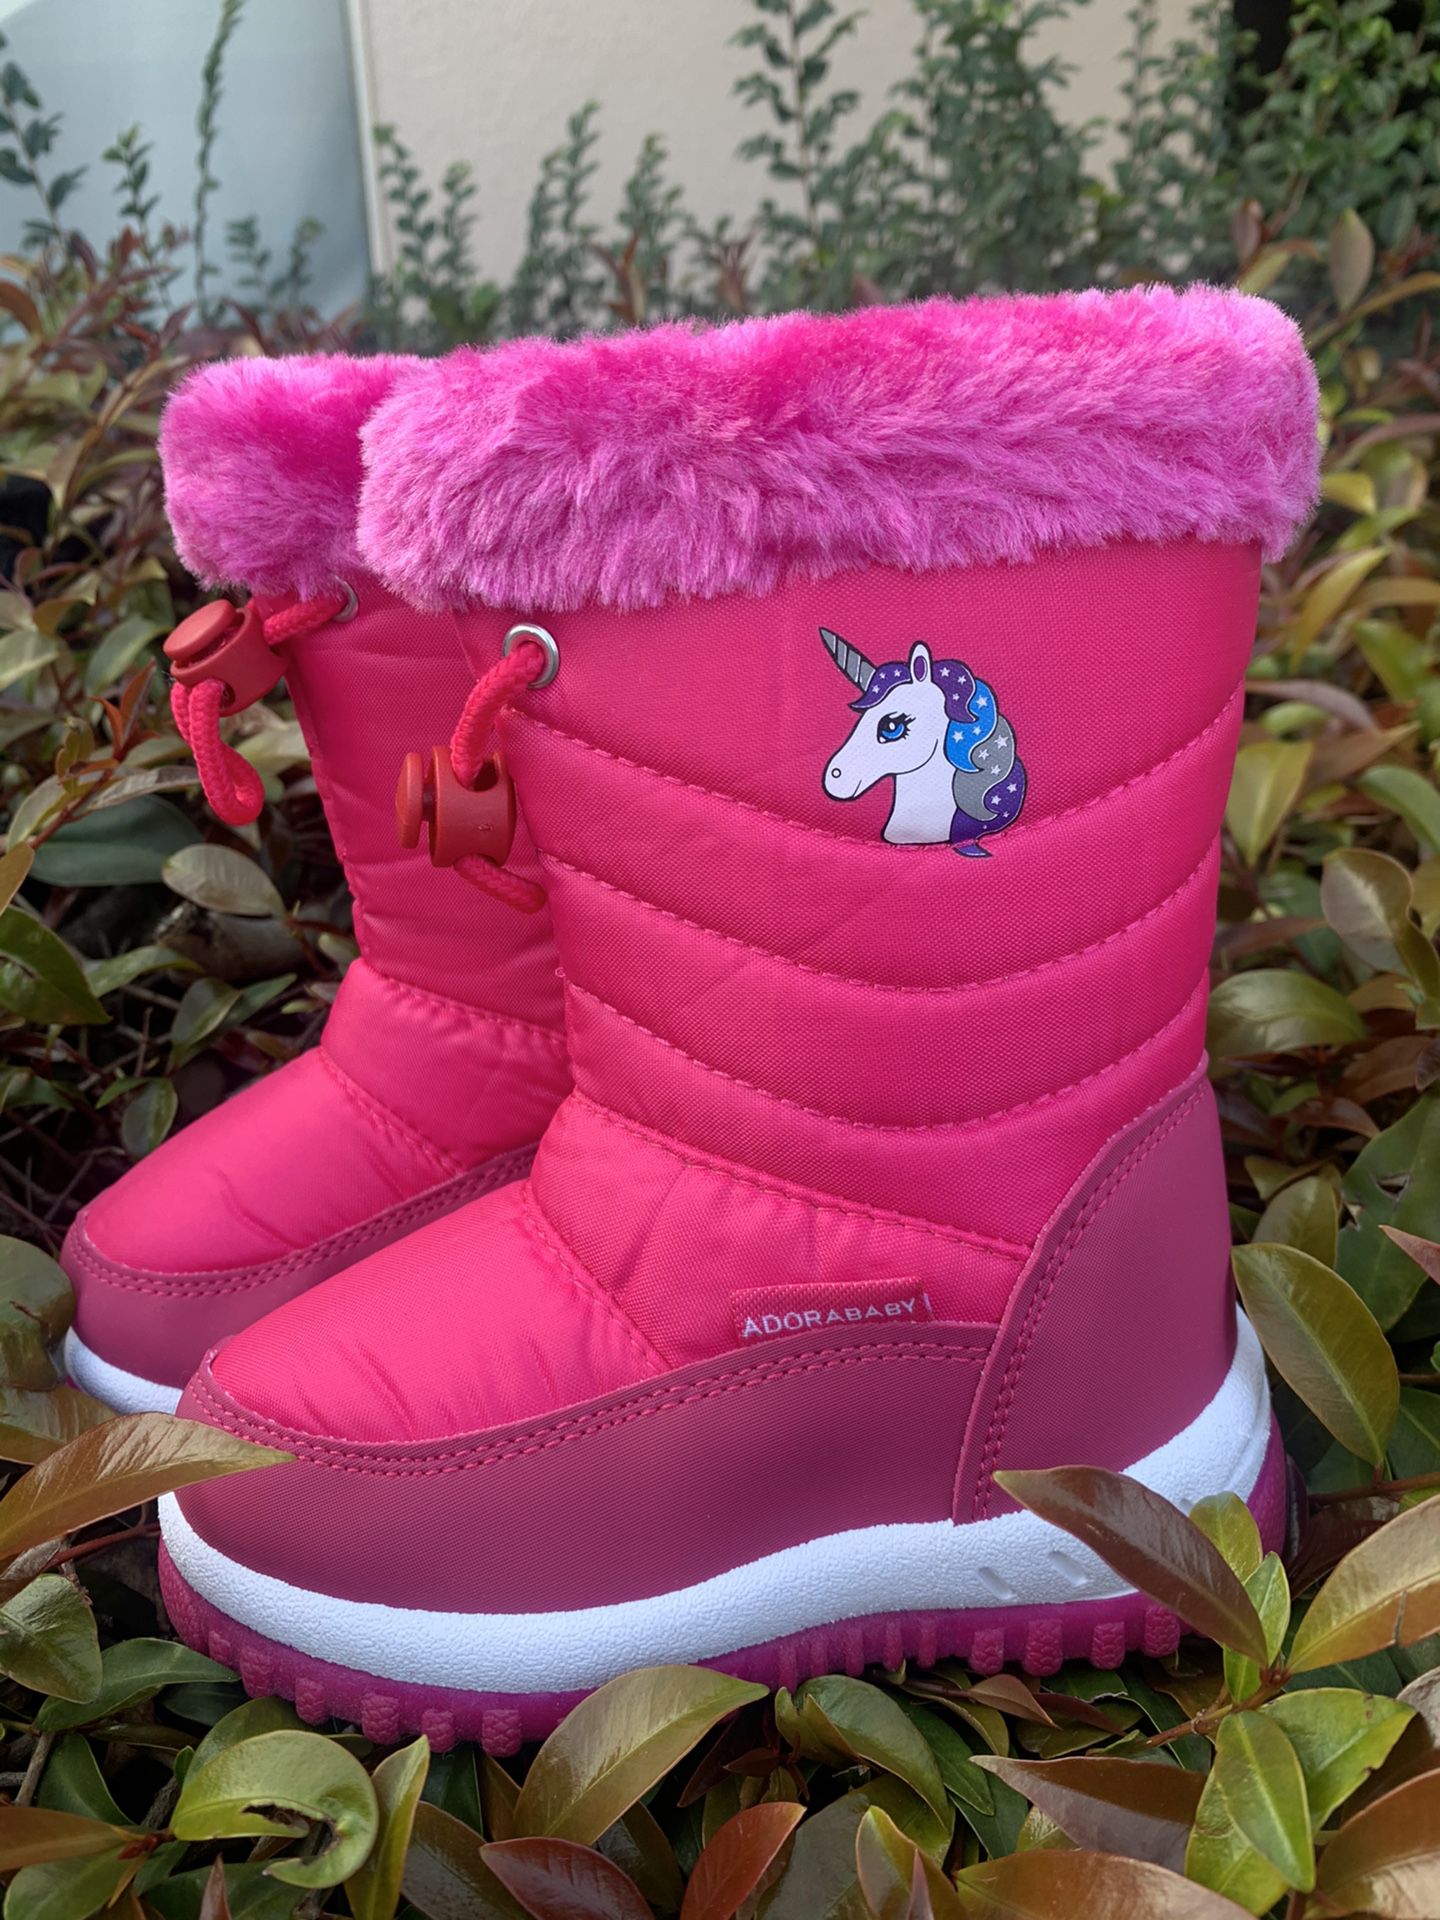 Snow boots for toddlers little girls sizes 6c, 7c, 8c